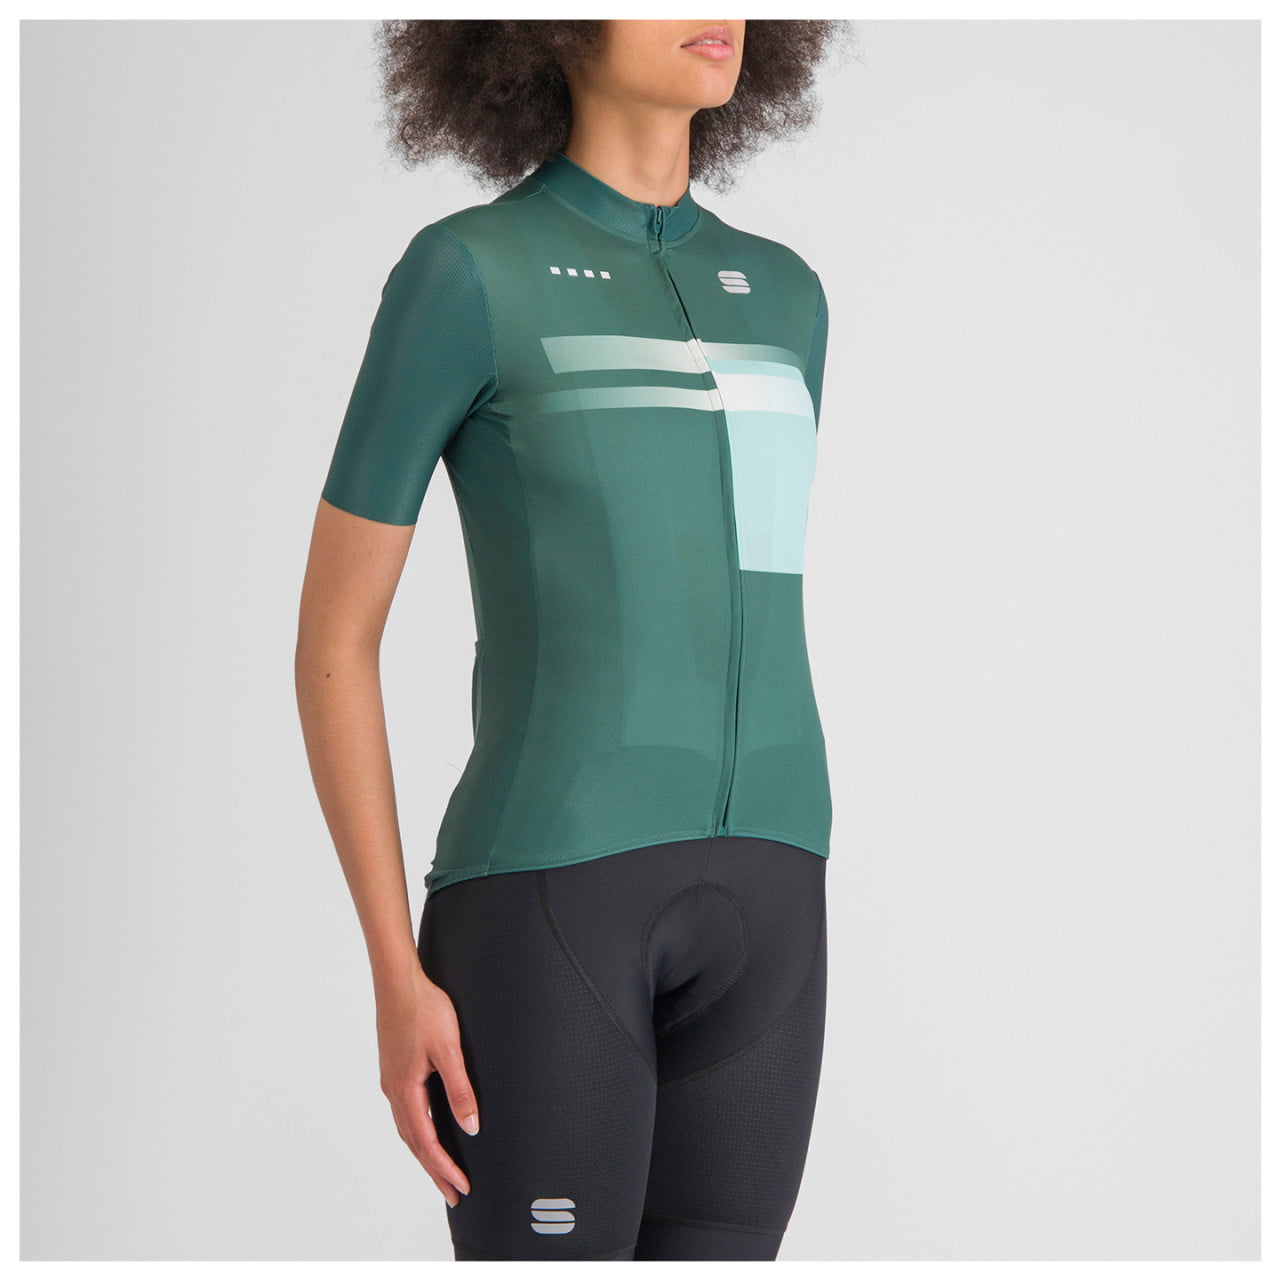 Maillot manches courtes femme Gruppetto